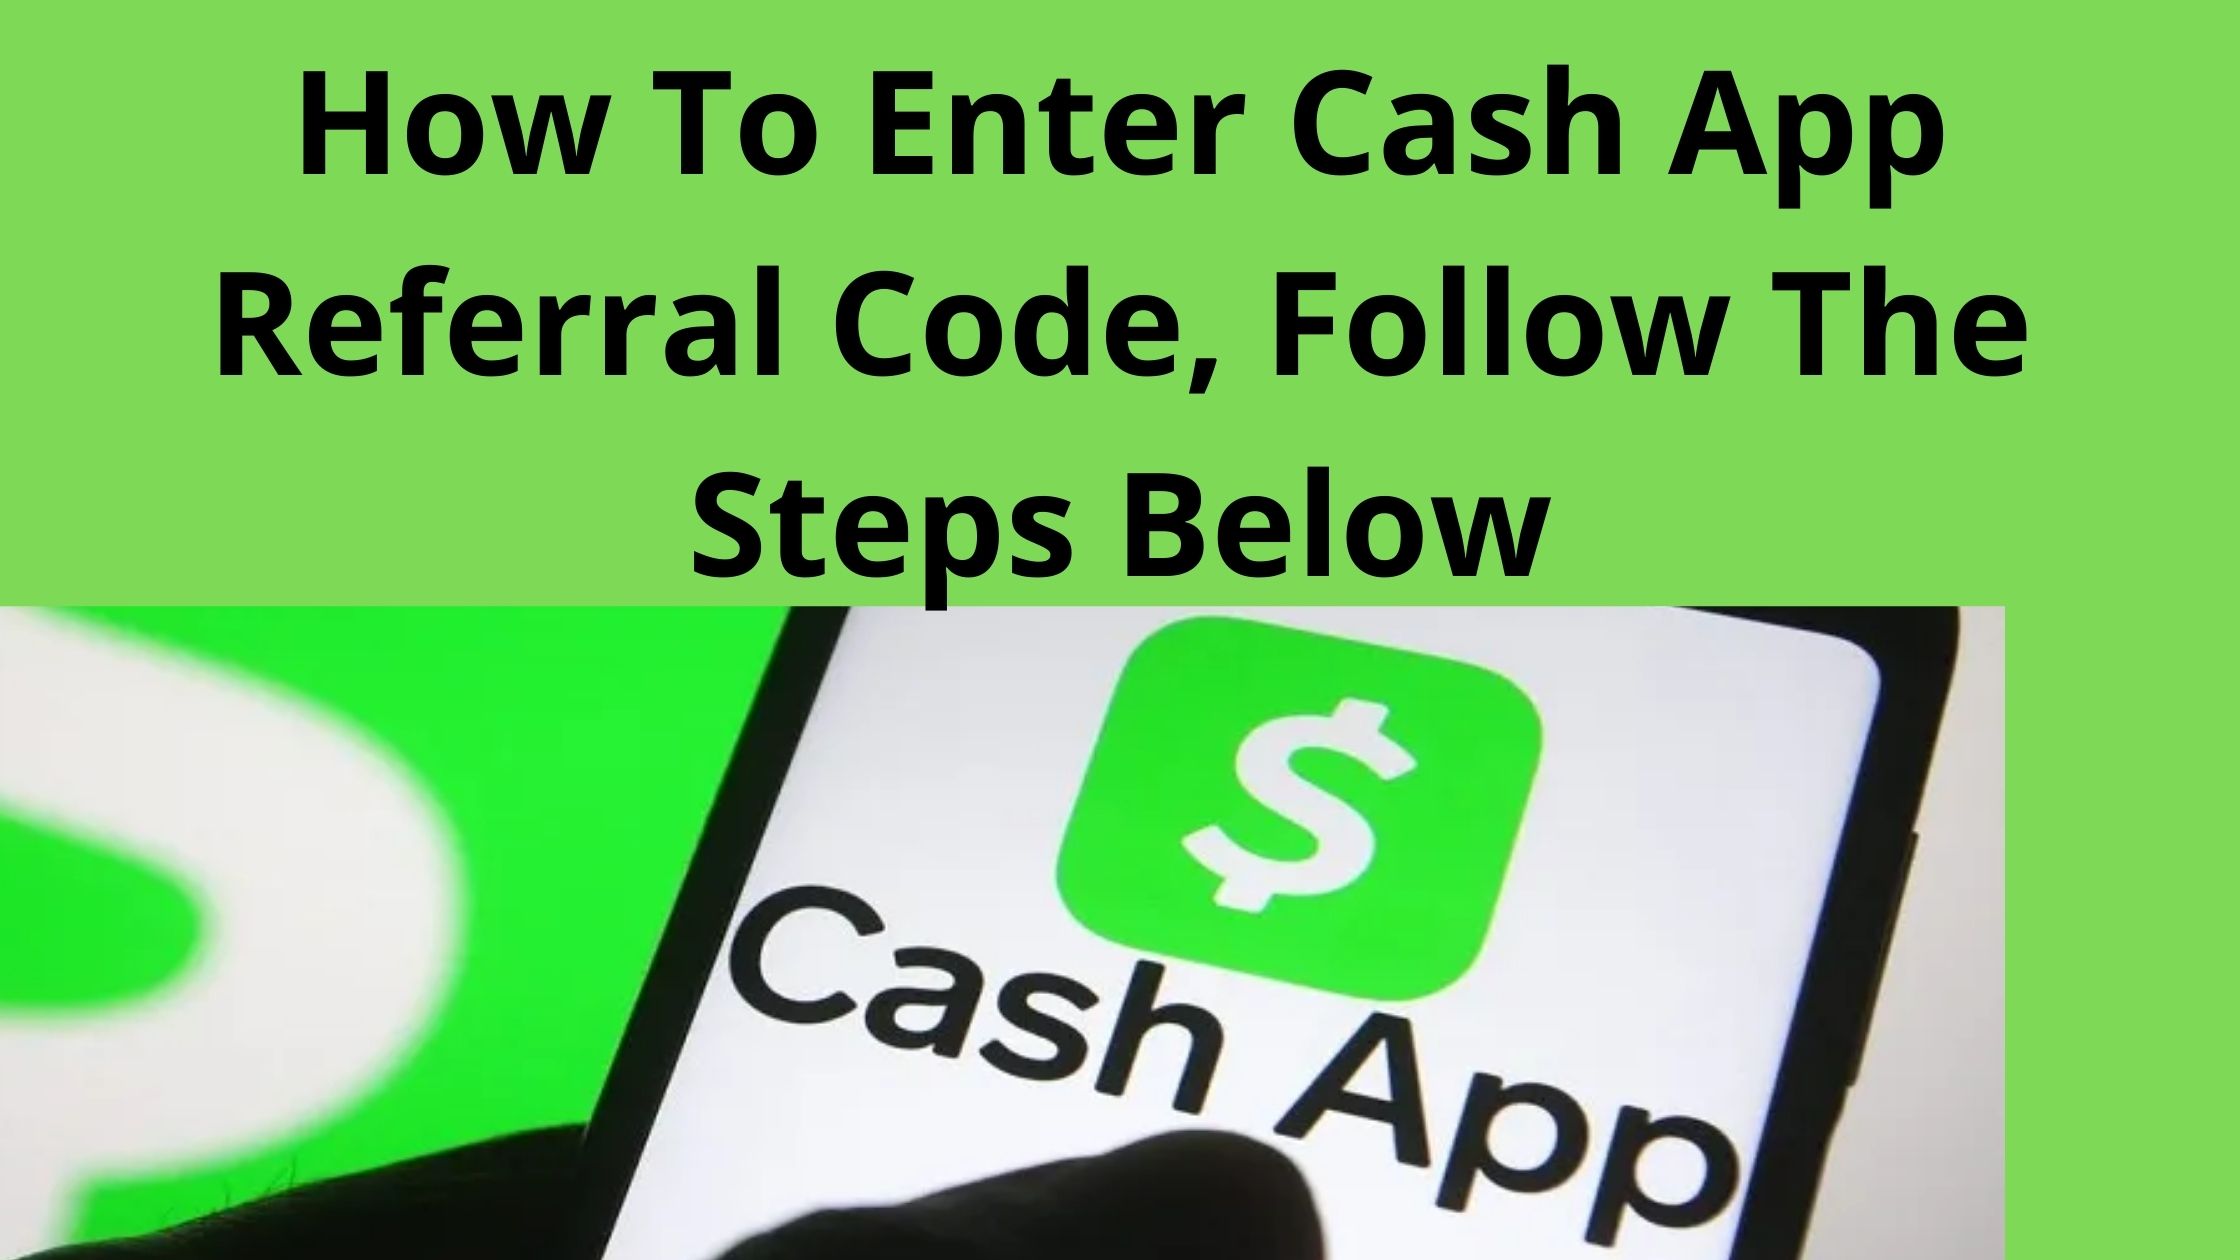 How To Enter Cash App Referral Code, Follow The Steps Below